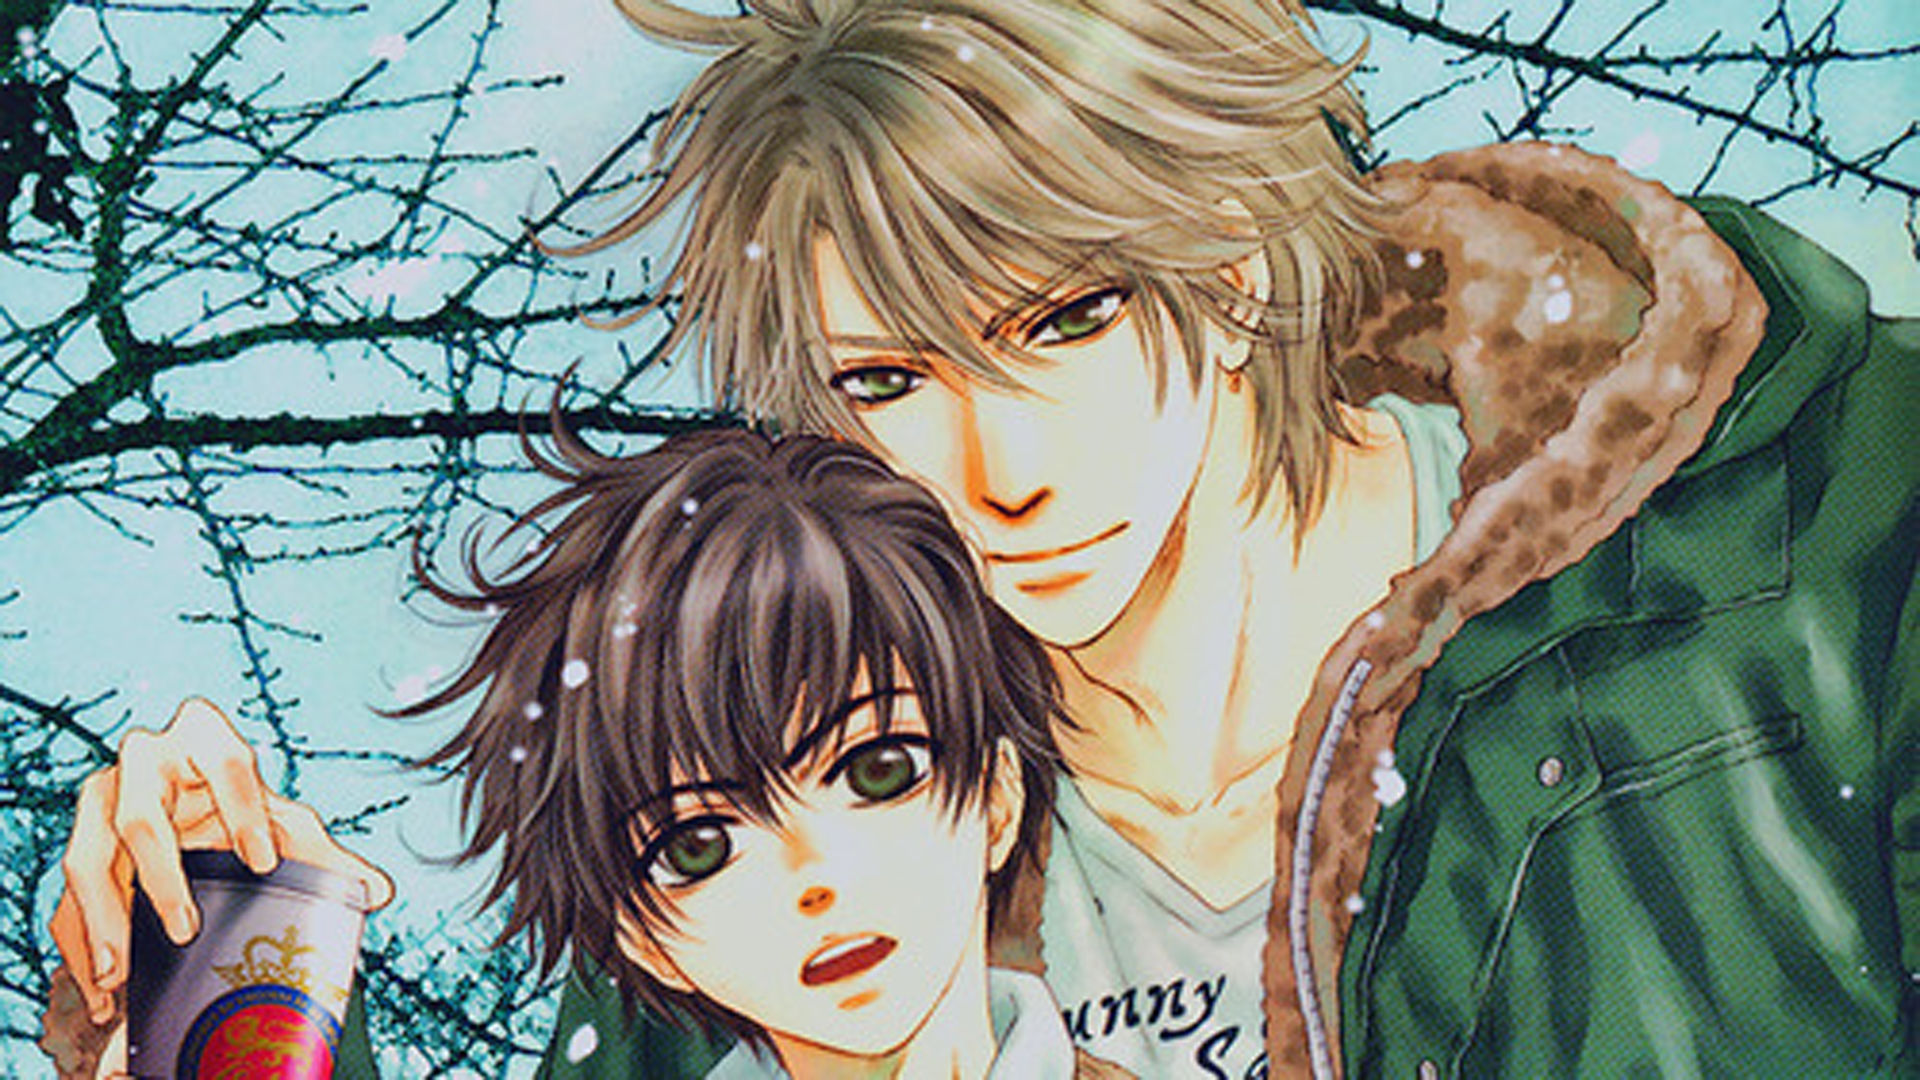 Super Lovers Anime Wallpapers - Wallpaper Cave